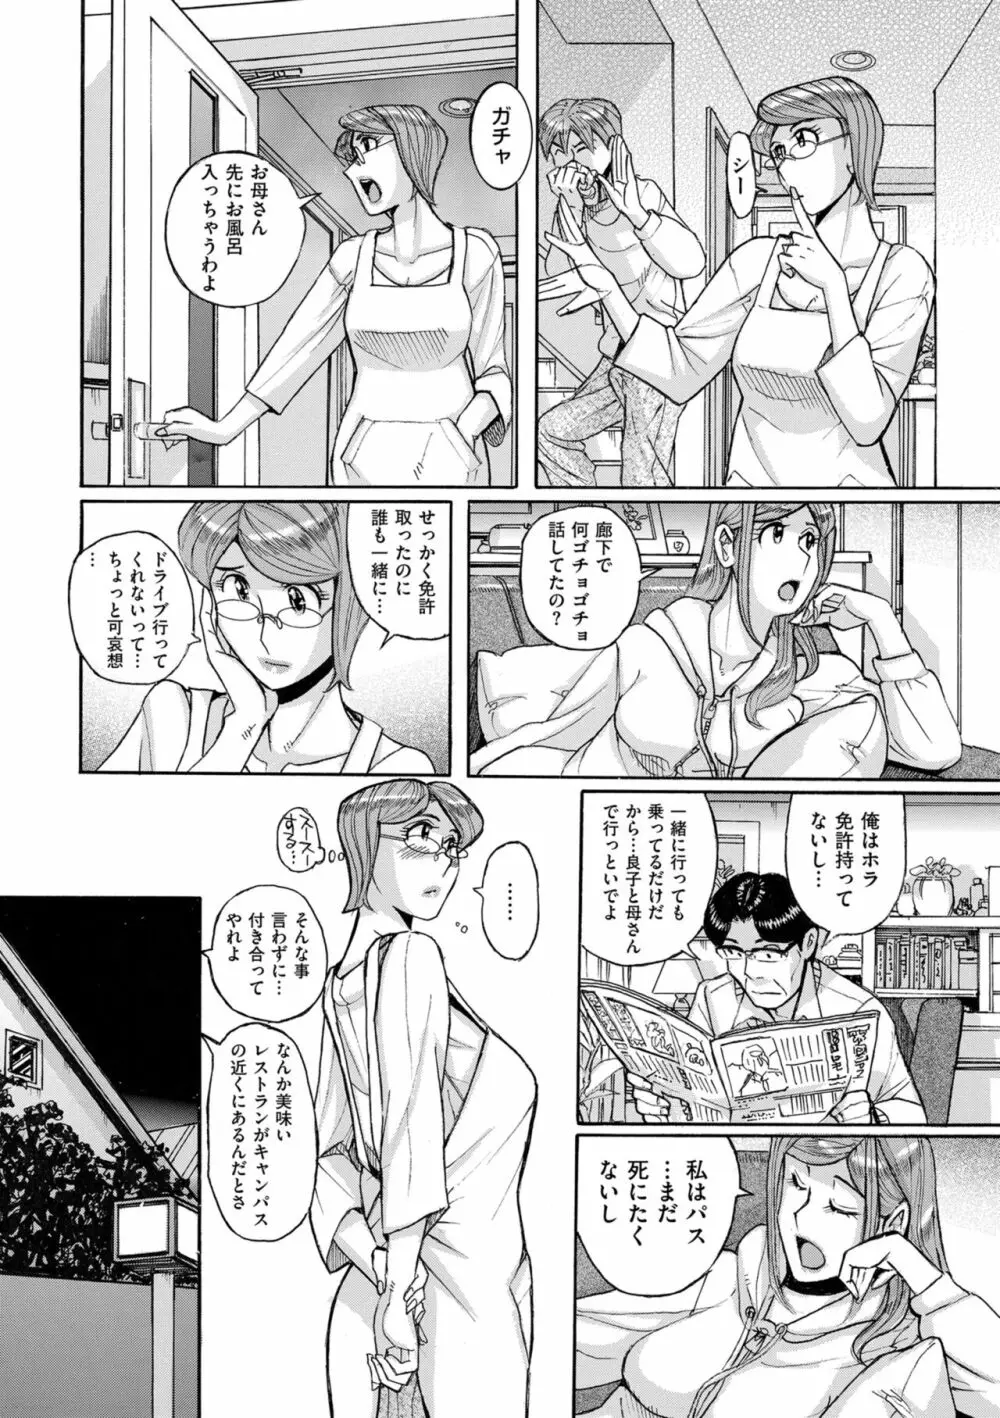 Mother’s Care Service How to ’Wincest’ 58ページ